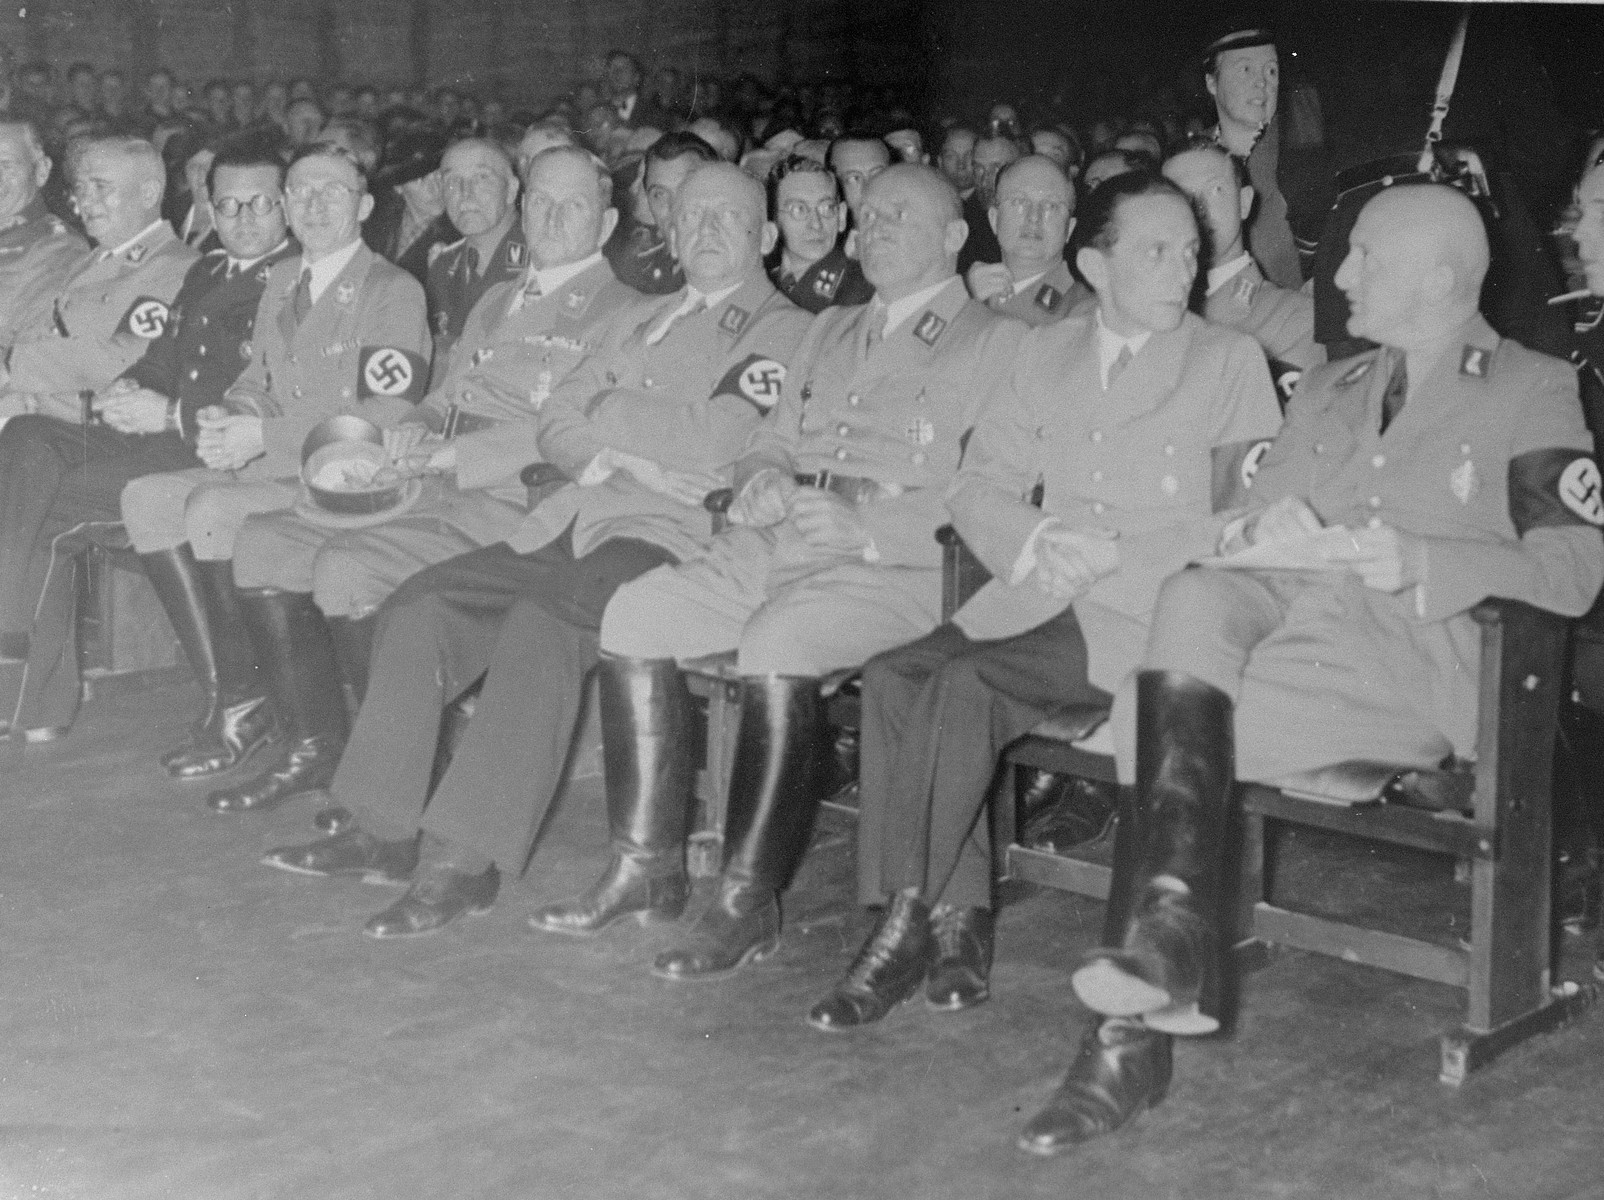 Julius Streicher, Joseph Goebbels and other Nazi officials attend the opening ceremony for "The Eternal Jew" in Munich.

The individuals in the front row (left to right) have been identified as General Werner von Blomberg (partial view), Ludwig Siebert, Phillip Bouhler, Karl Fiehler, Franz Xaver Ritter von Epp, Adolf Wagner, Julius Streicher, Josef Goebbels, and Otto Nippold. Pictured in the second row, between Goebbels and Streicher is  Deputy Gauleiter Georg Tesche.